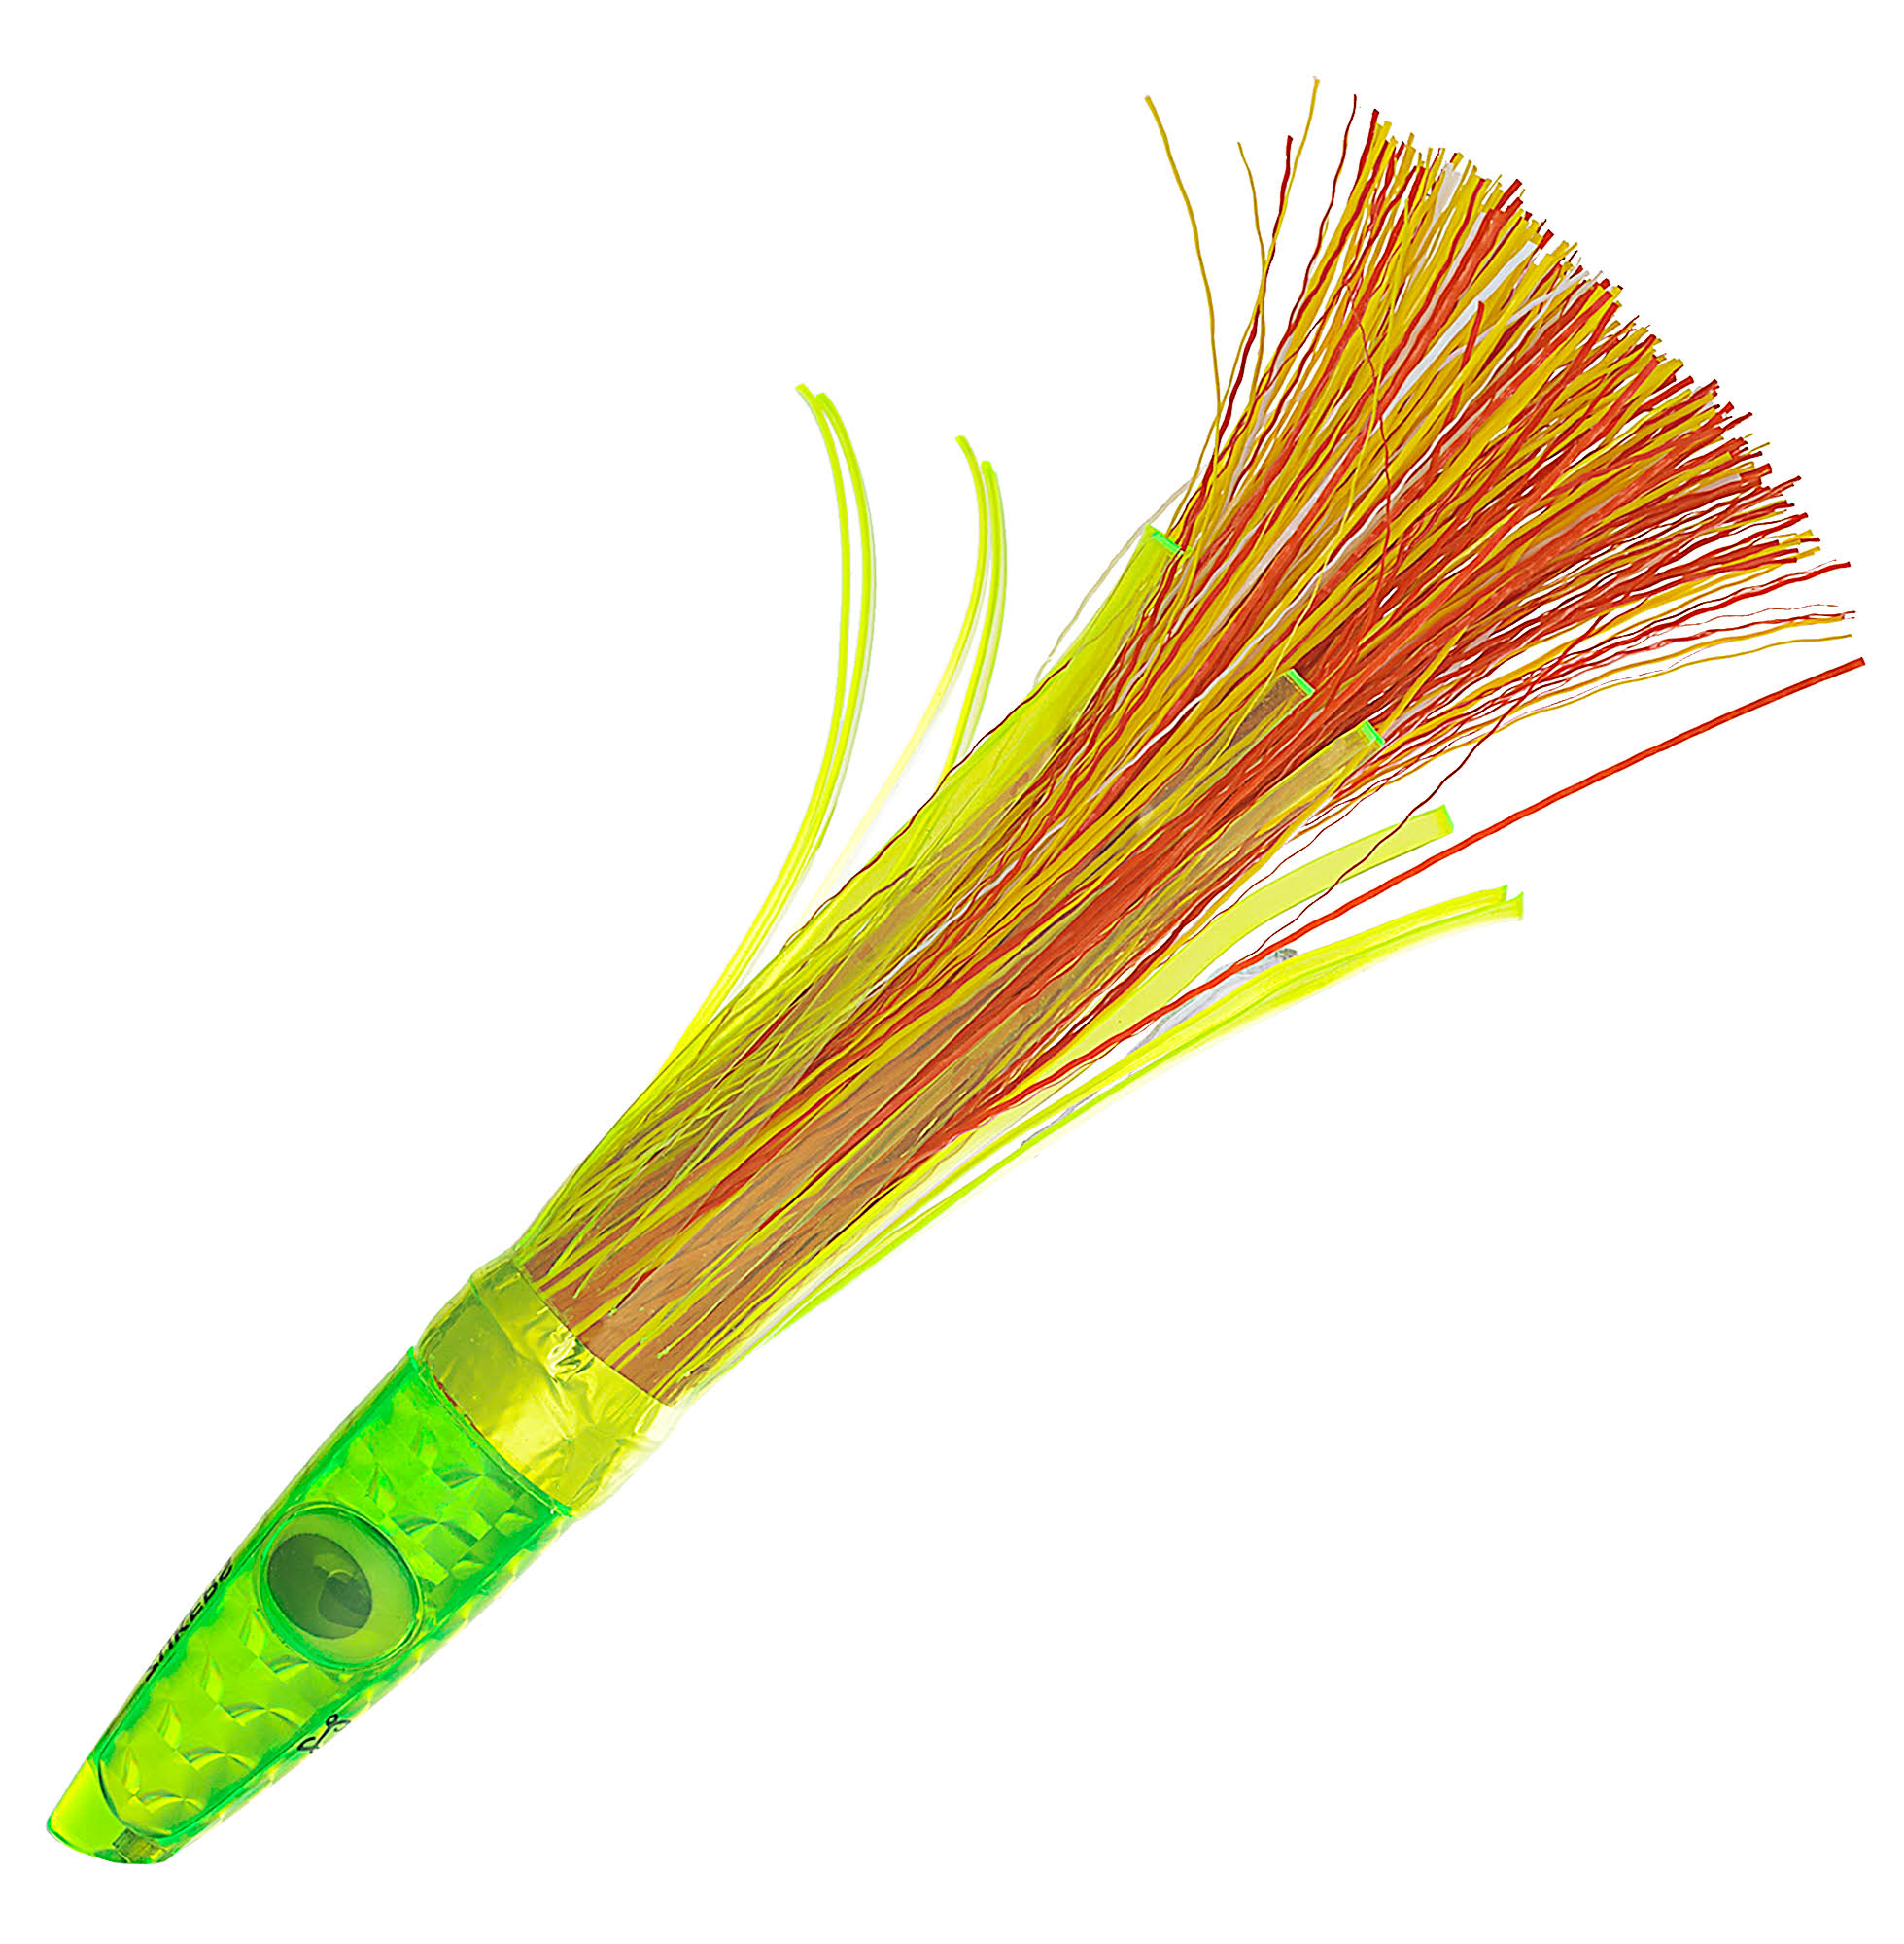 Zuker's Grass Lures | Boating & Fishing | Delivery guaranteed | 30 Day Money Back Guarantee | Free Shipping On All Orders